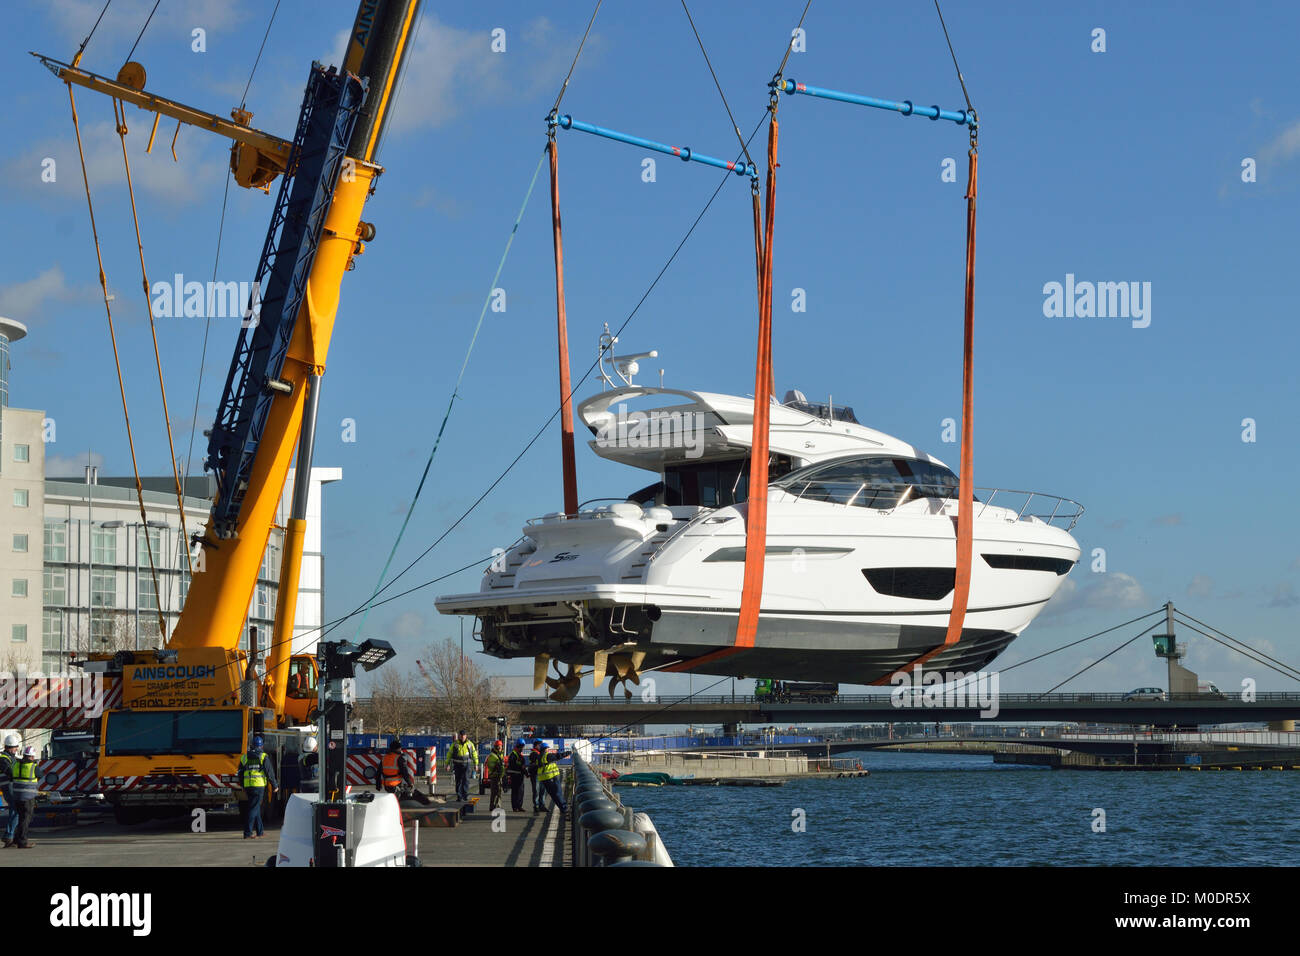 Crane lifting boats back in to the water after they have attended the 2018 London Boat Show held at ExCel London exhibition centre Stock Photo